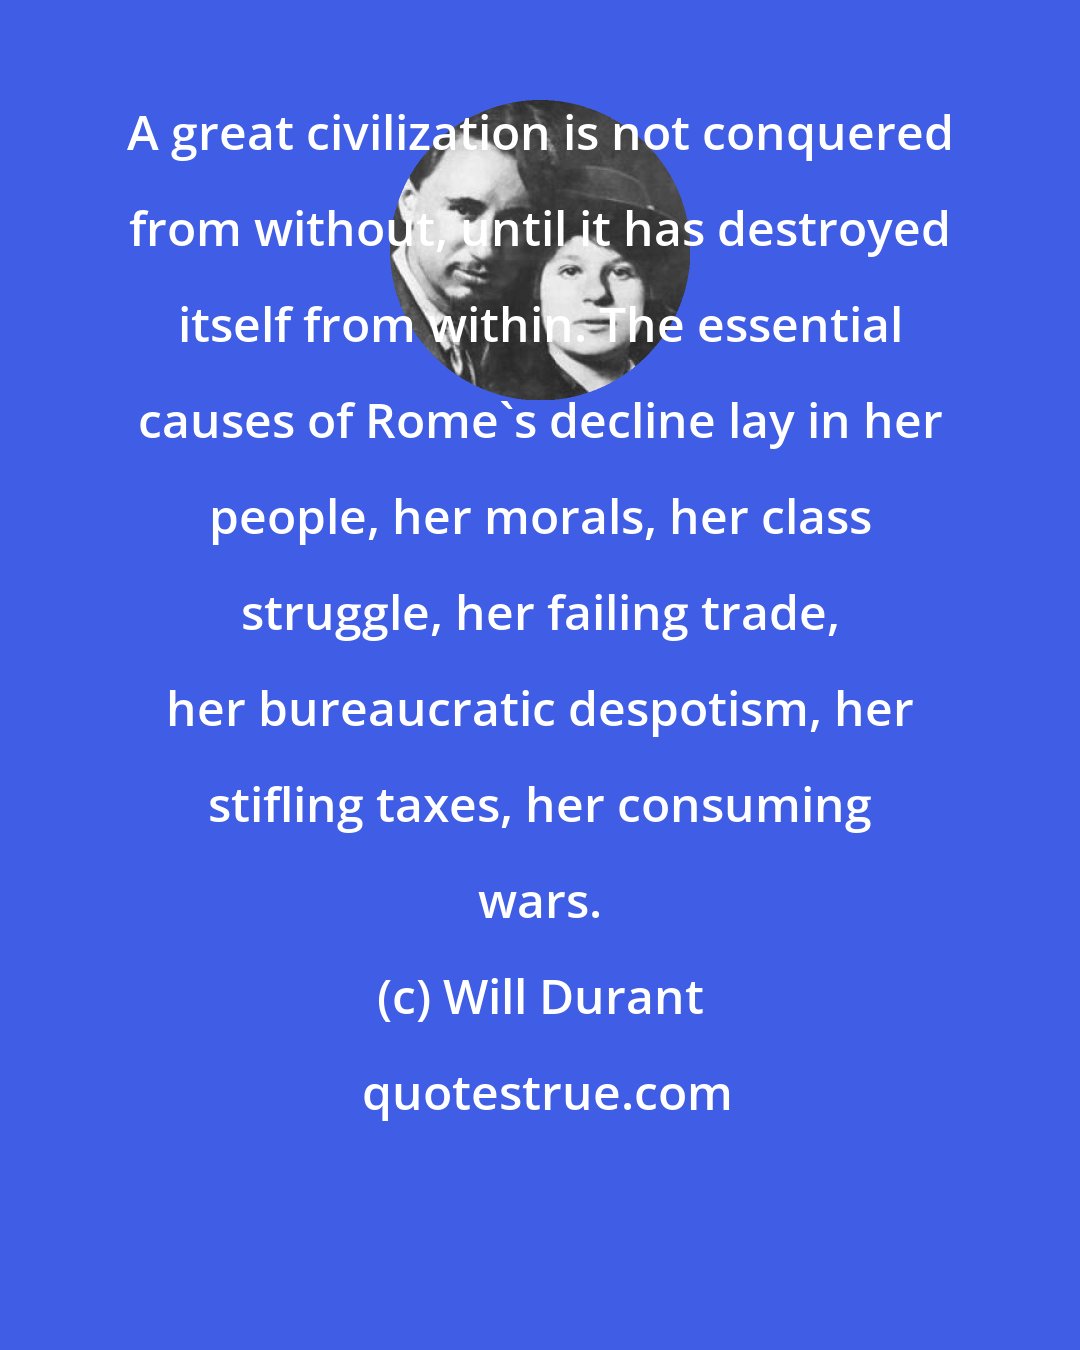 Will Durant: A great civilization is not conquered from without, until it has destroyed itself from within. The essential causes of Rome's decline lay in her people, her morals, her class struggle, her failing trade, her bureaucratic despotism, her stifling taxes, her consuming wars.